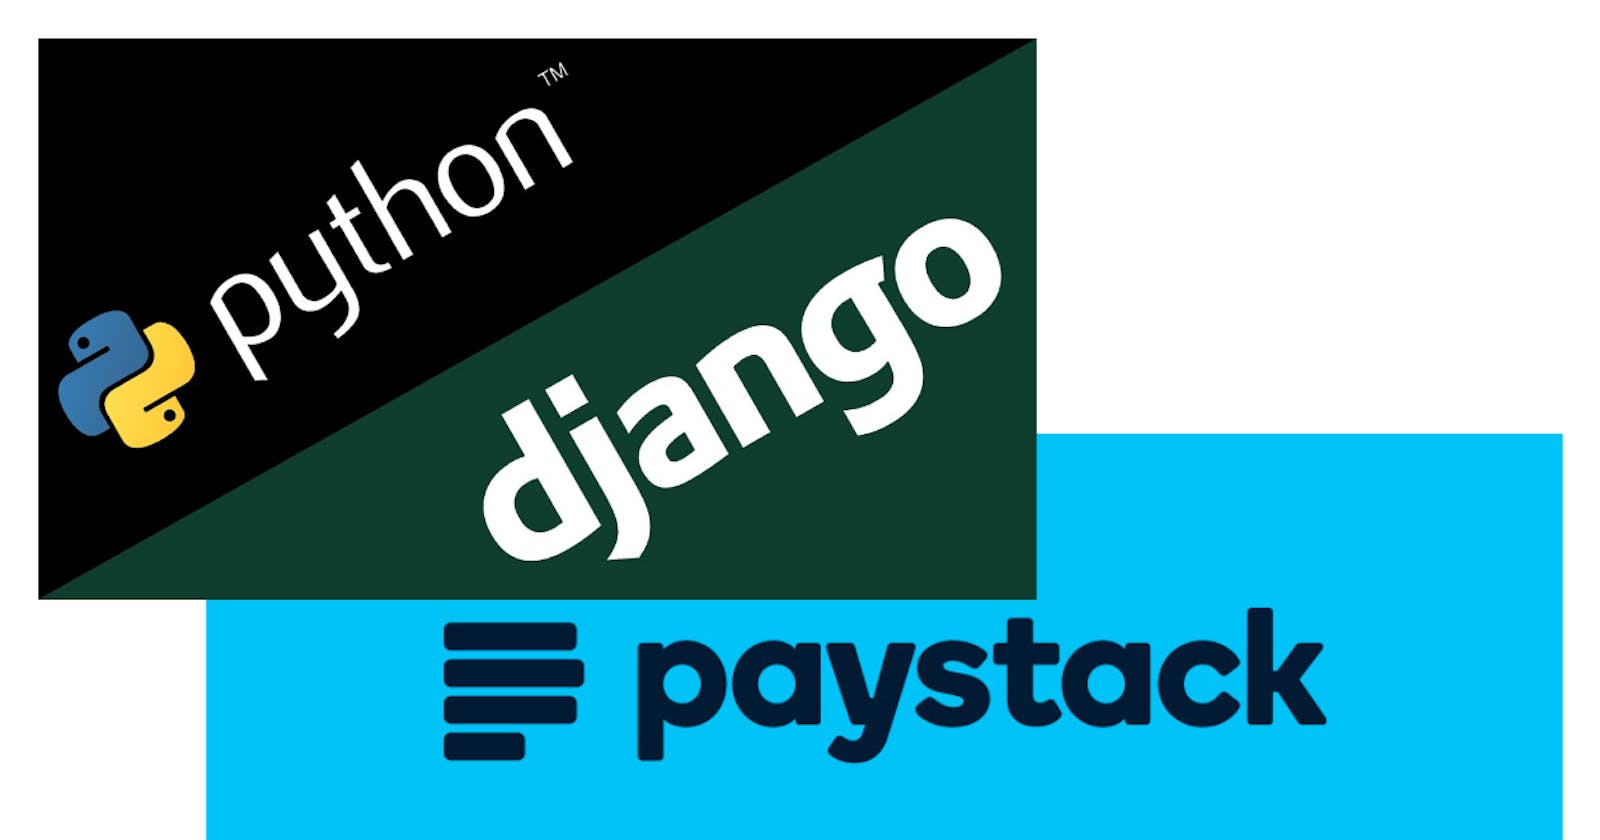 Integrating Paystack payment gateway into the Django project